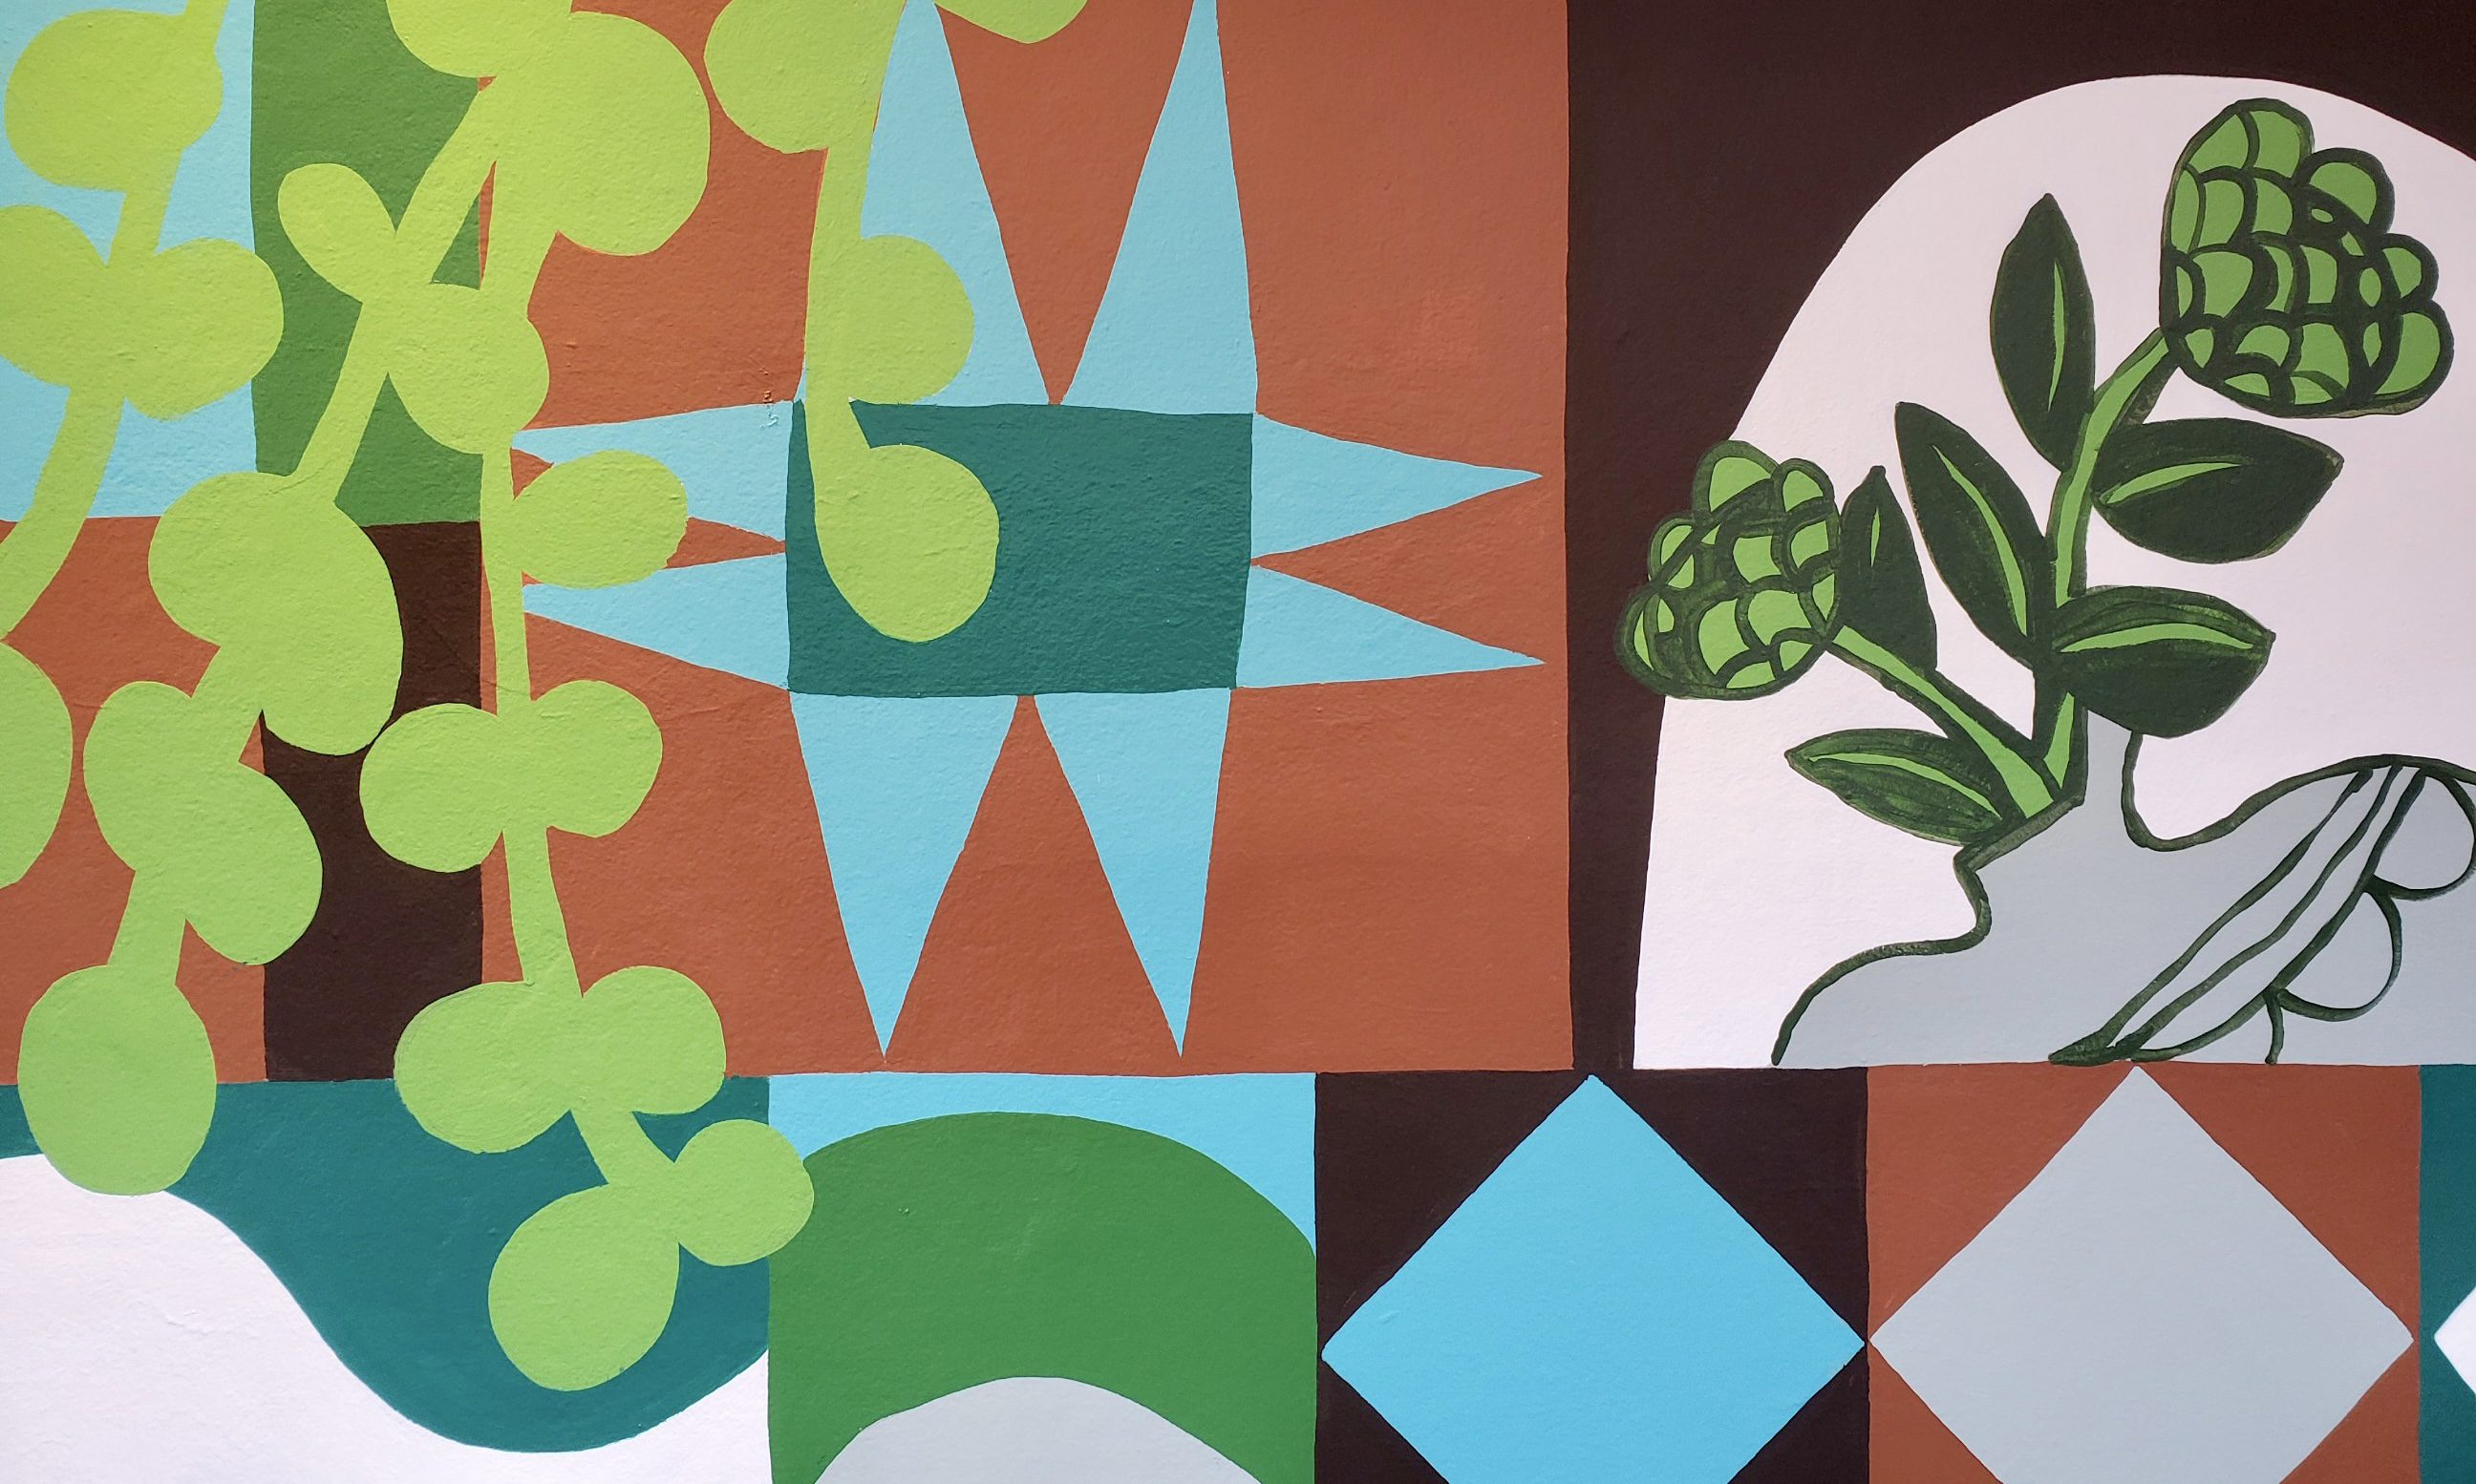 A detail photograph of the graphic mural with house plants by Rachel Adams.